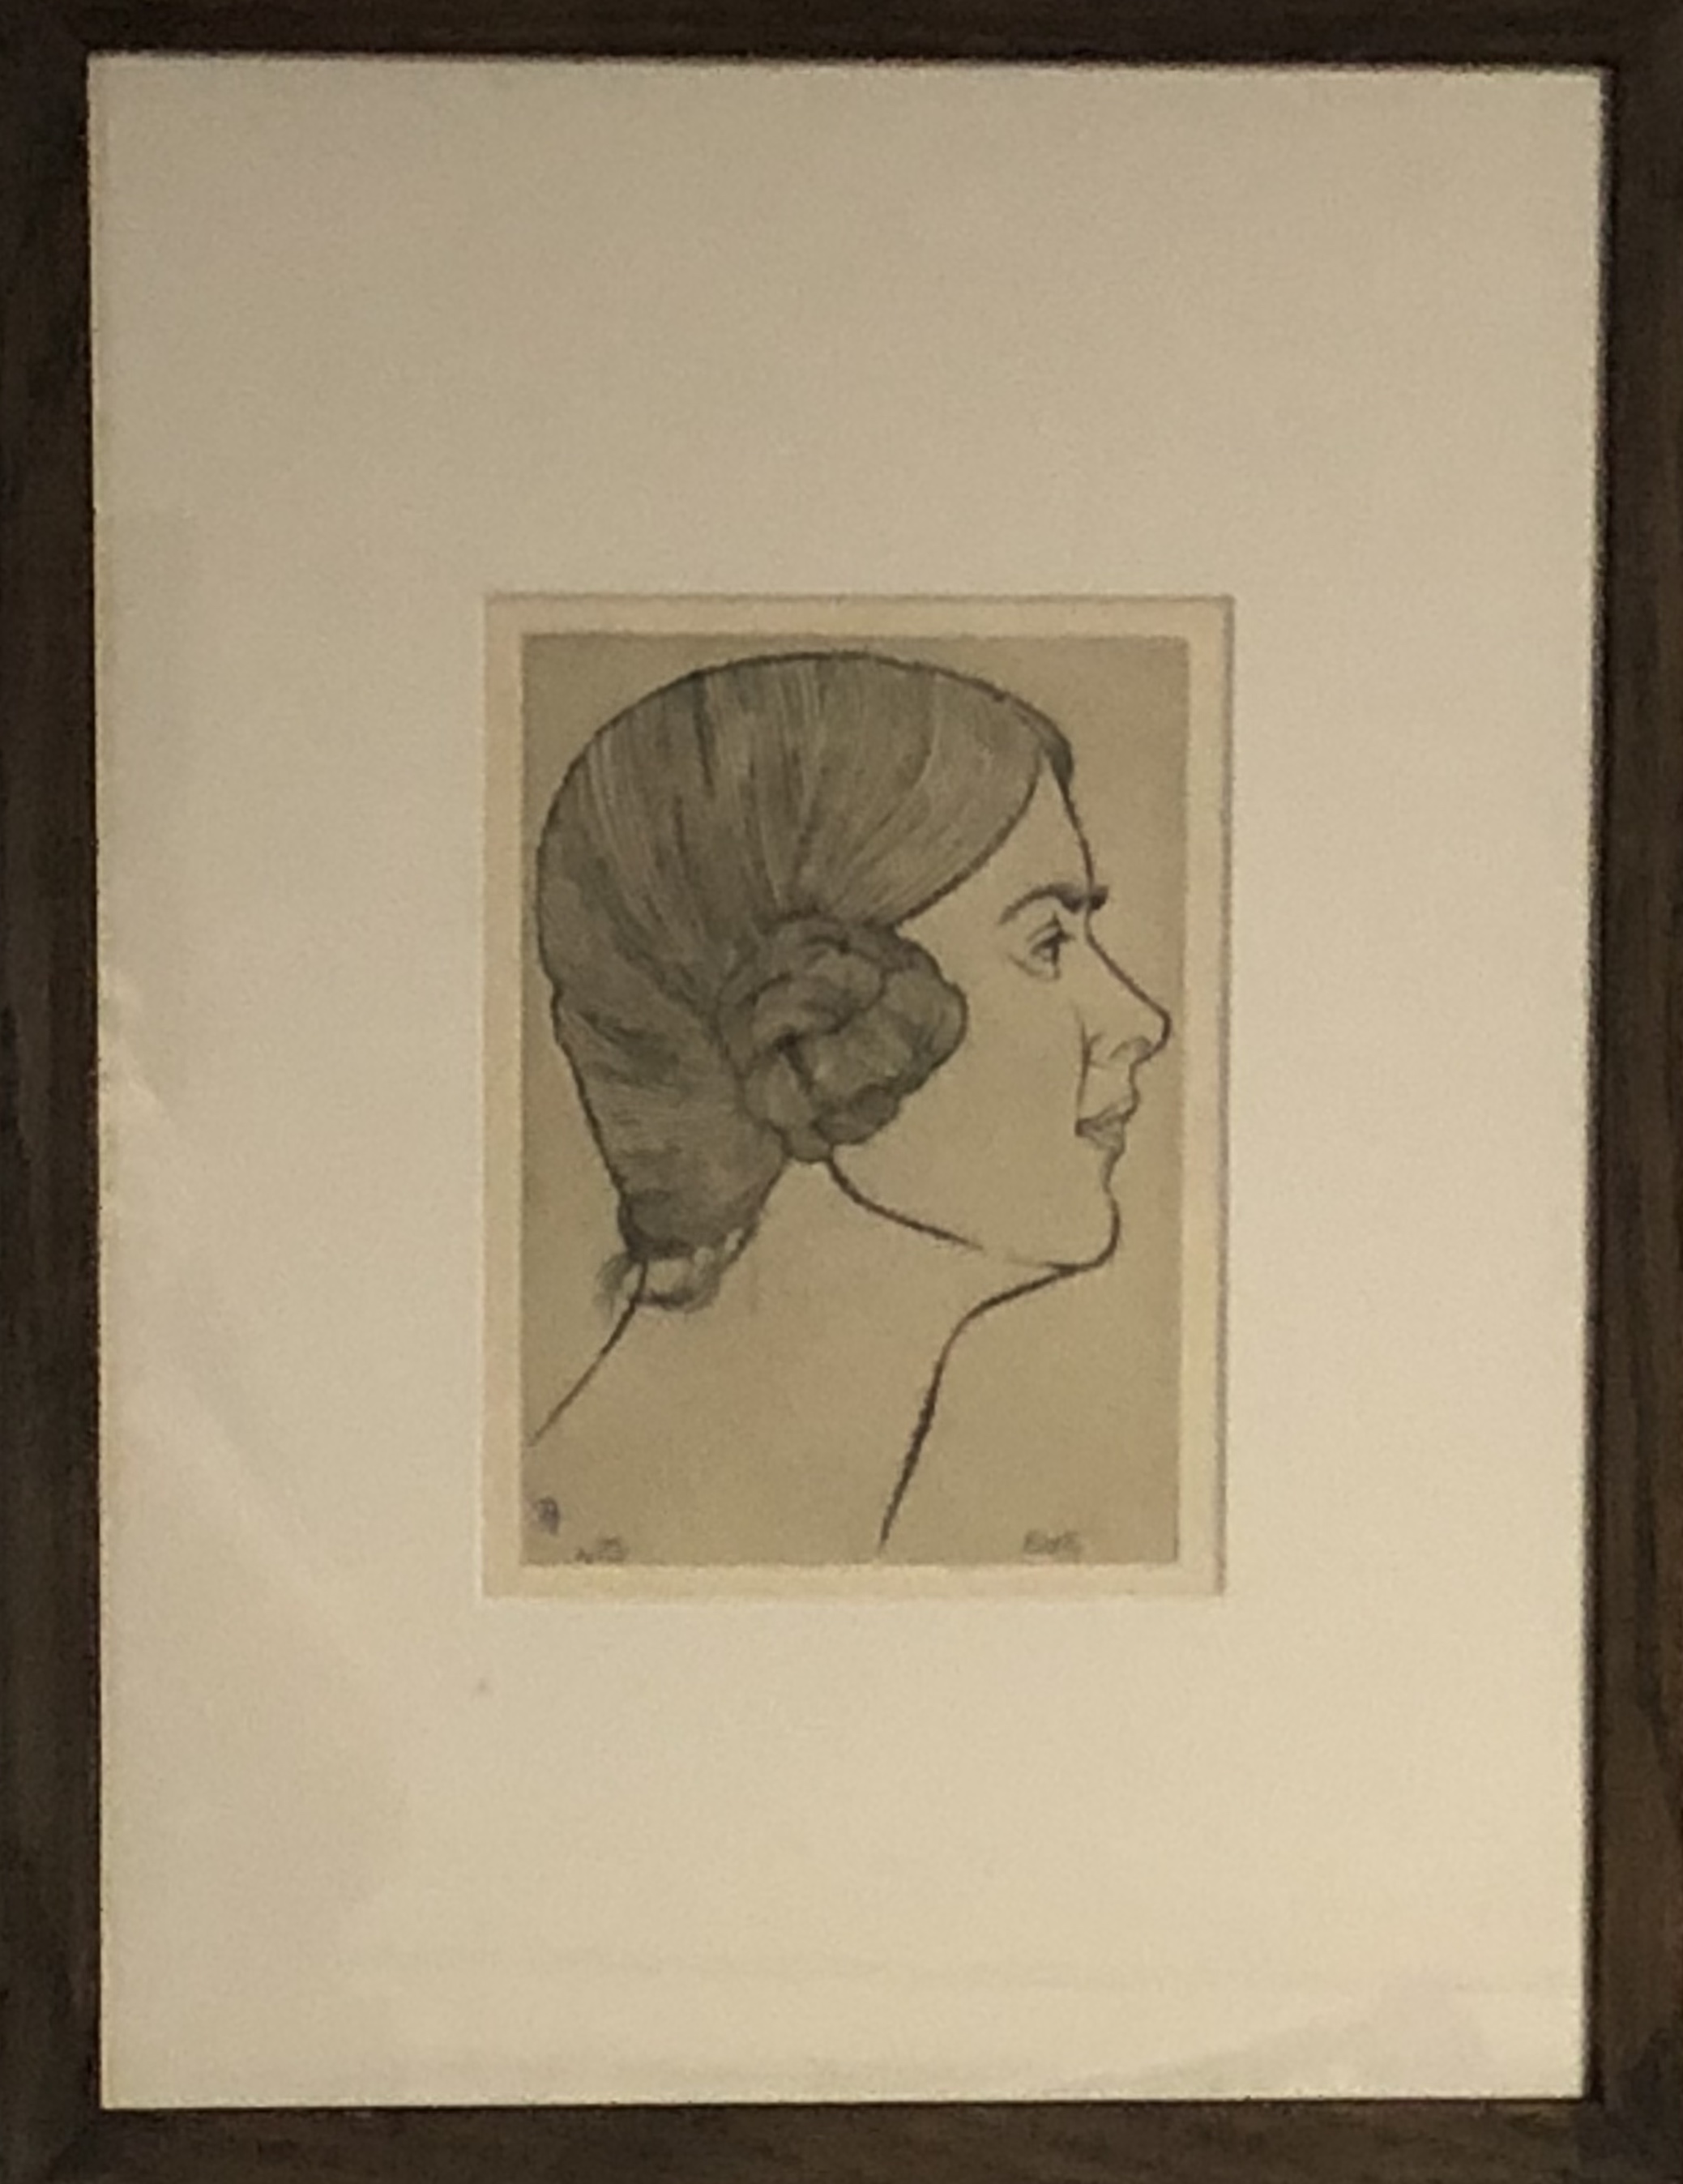 ERIC GILL, 1882 - 1940, COPPER ENGRAVING Portrait of Elizabeth Gill, 1927, mounted, framed and - Image 2 of 3